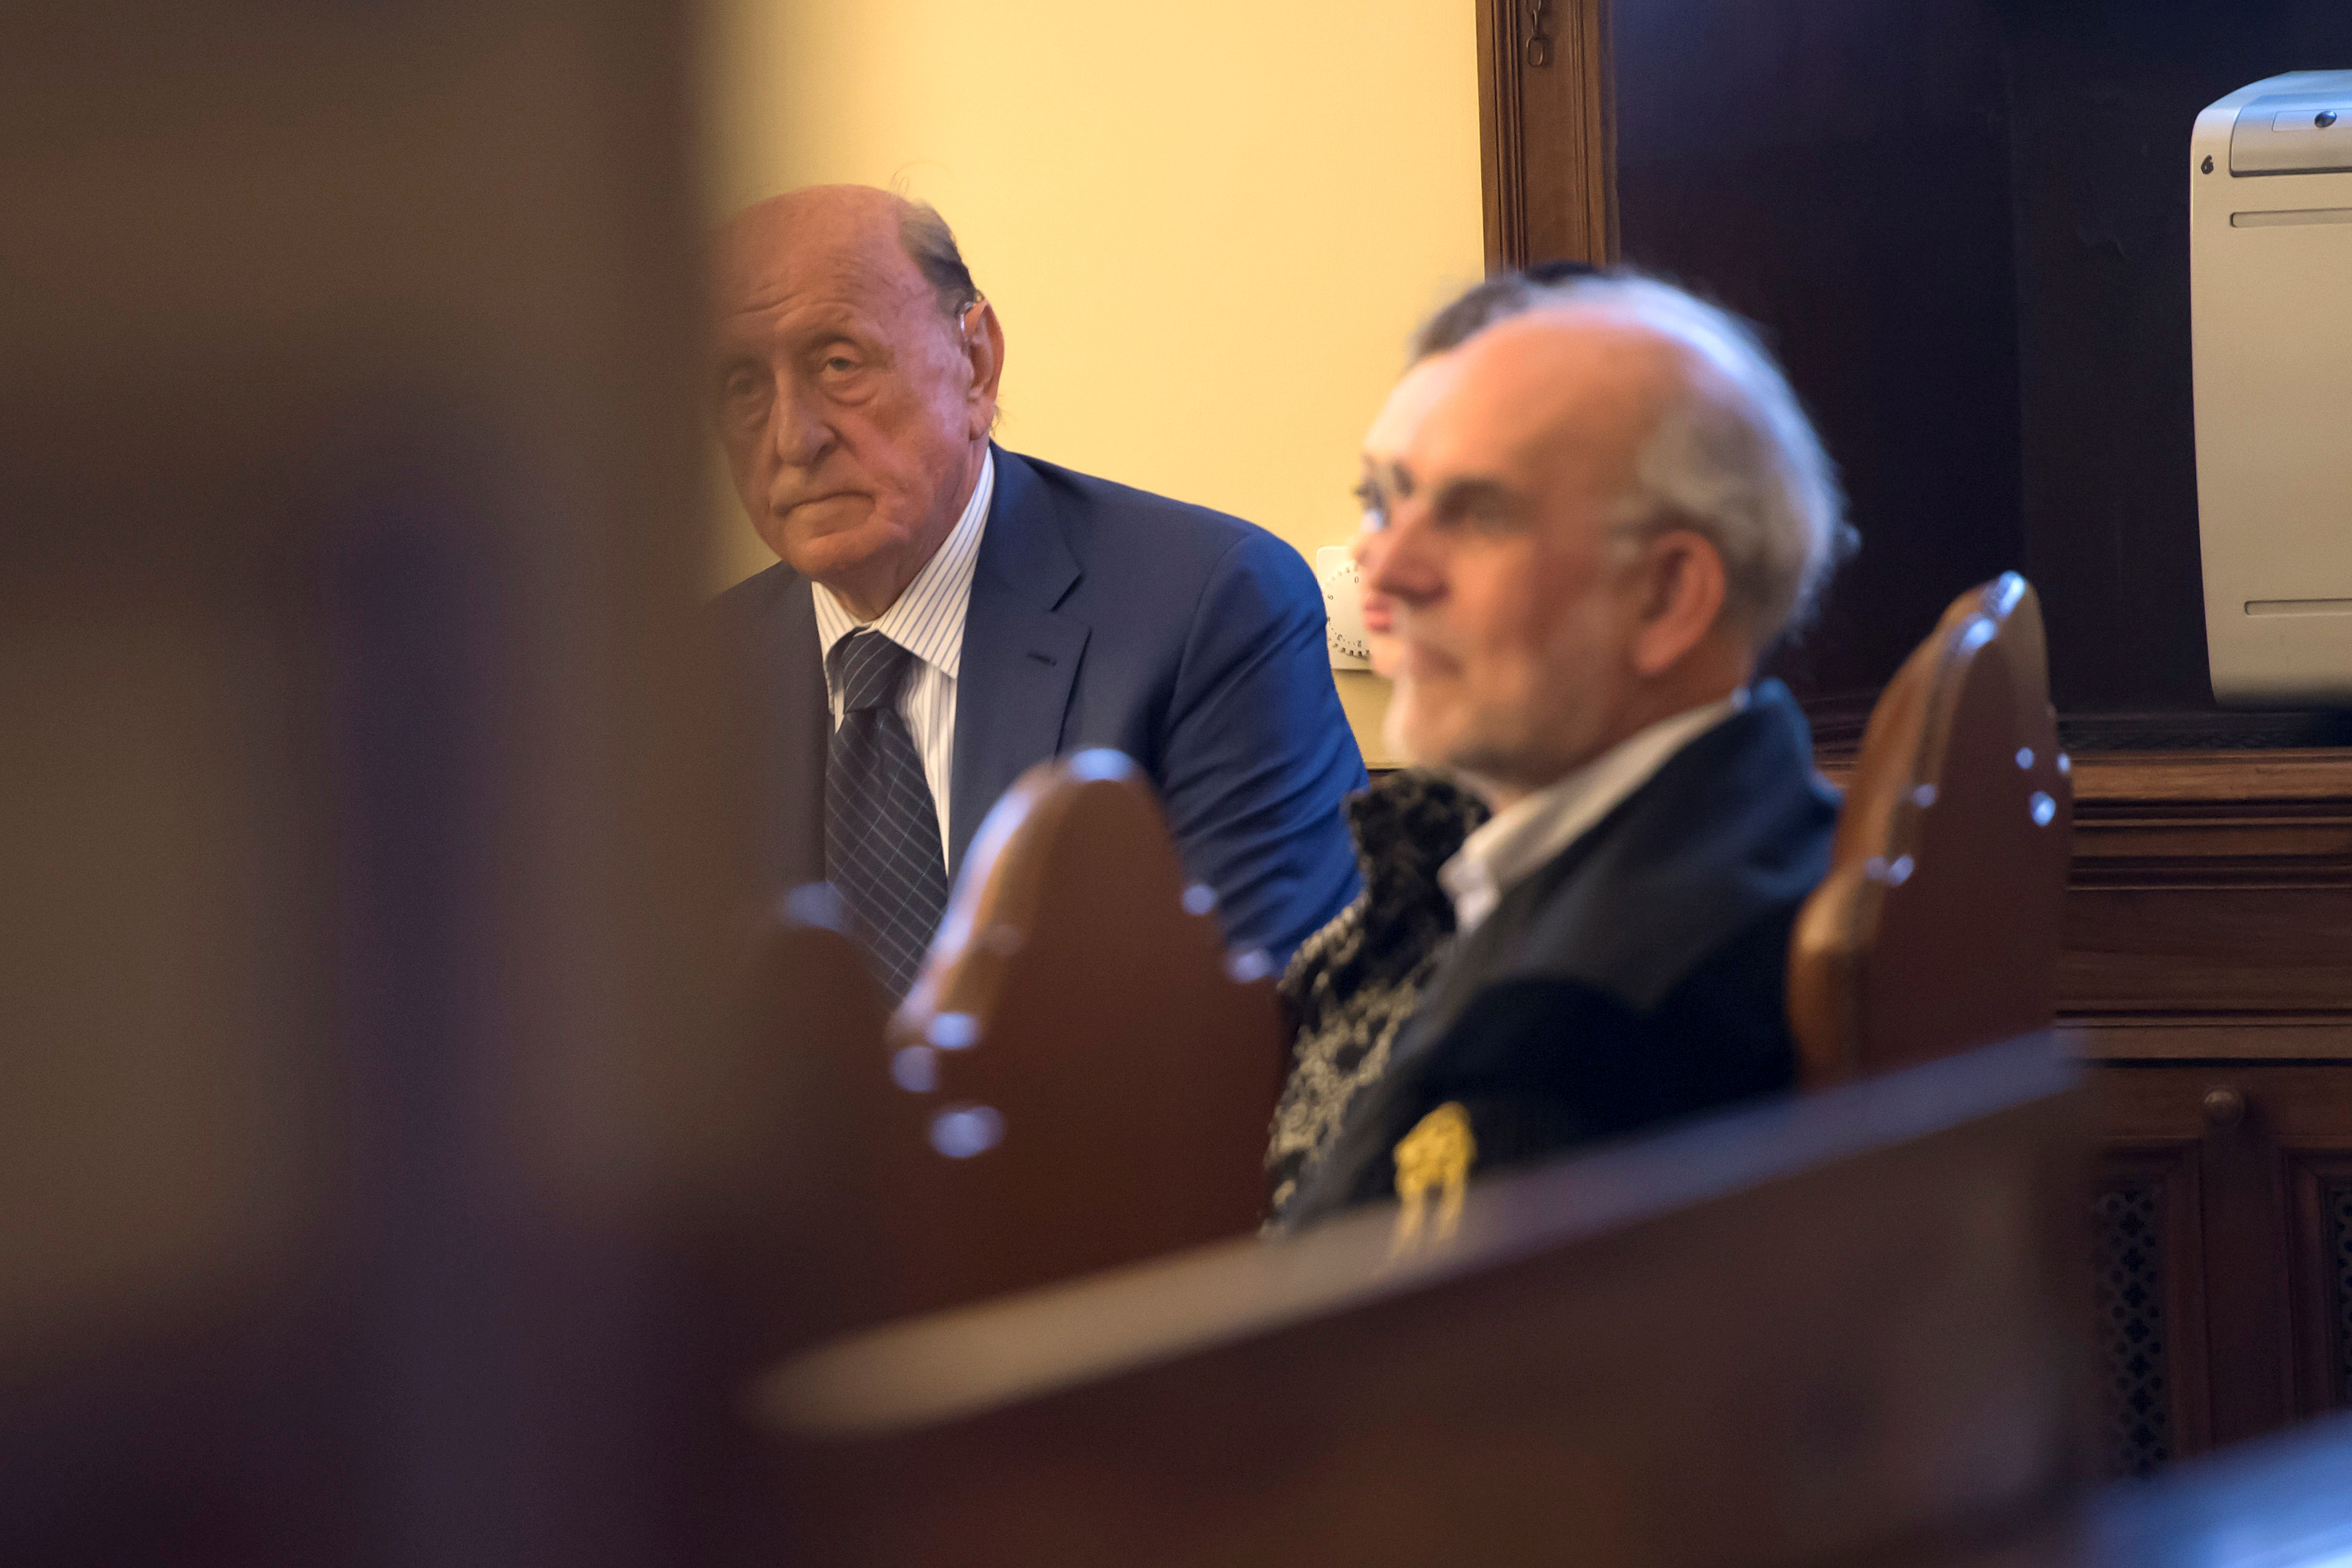 The former president of the Institute for Works of Religion (IOR) Angelo Caloia is seen during the first hearing of his trial at the Vatican